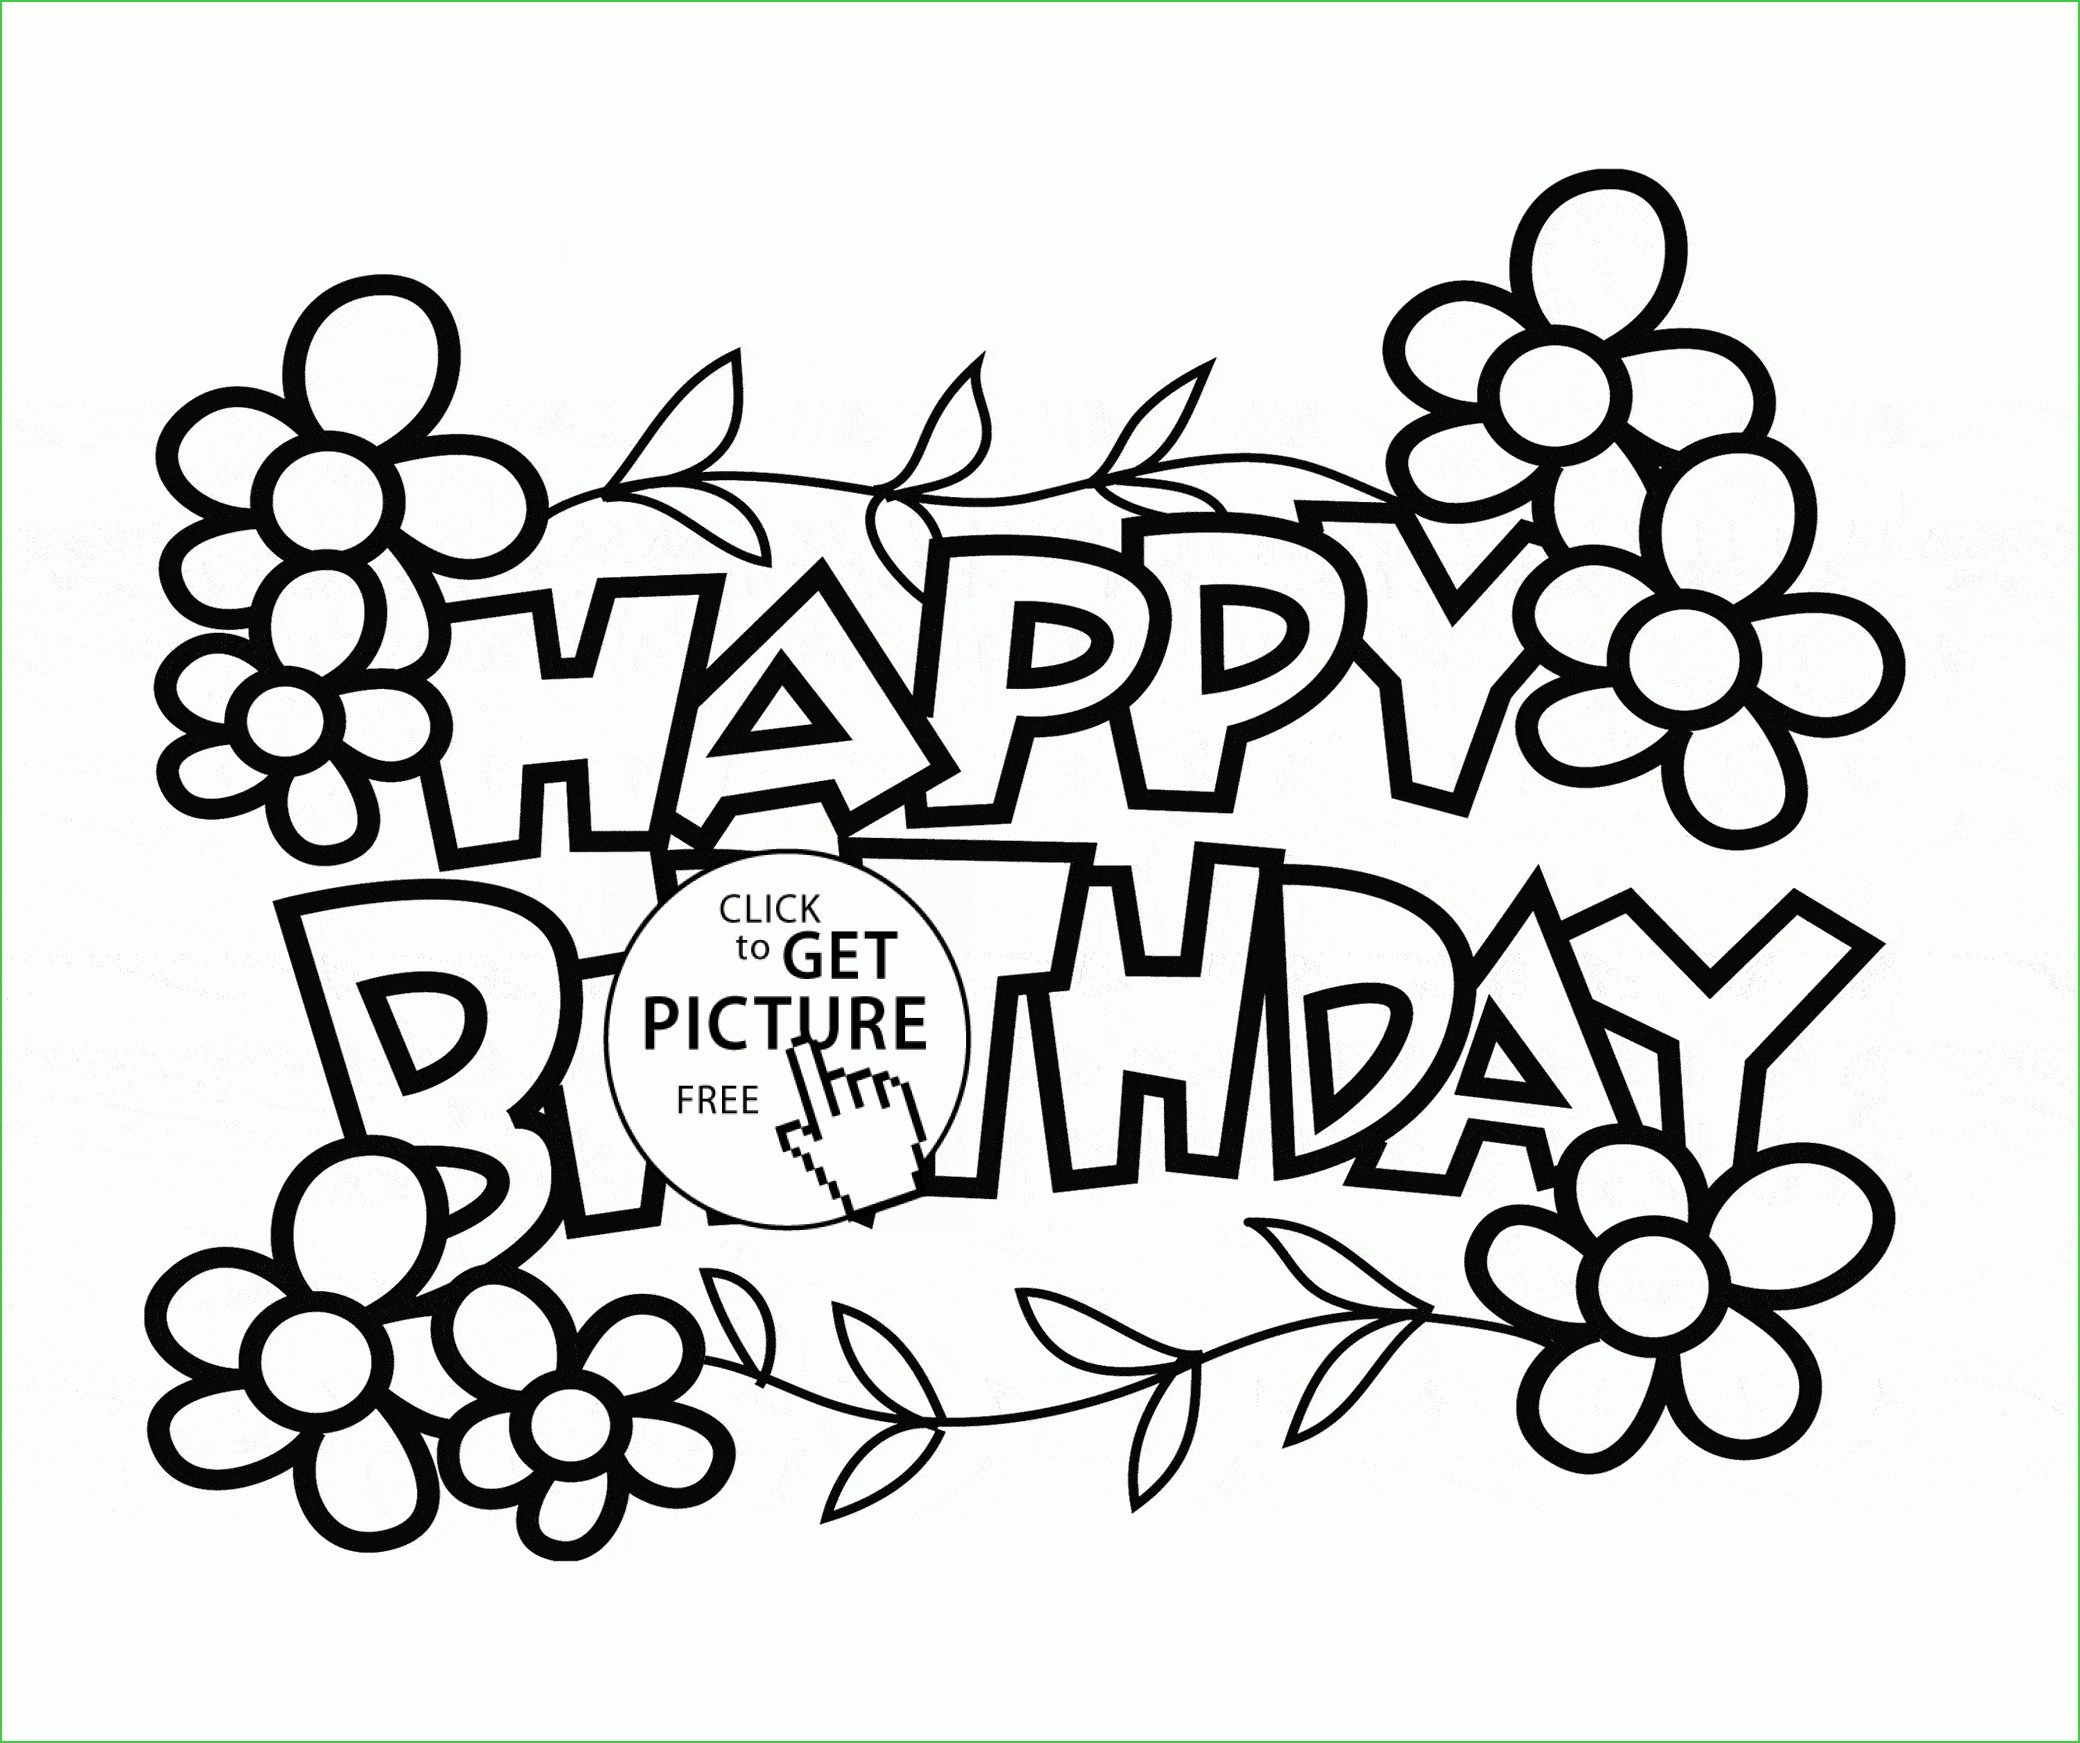 Happy Birthday Drawings For Card | Free Download Best Happy Birthday - Free Printable Birthday Cards To Color